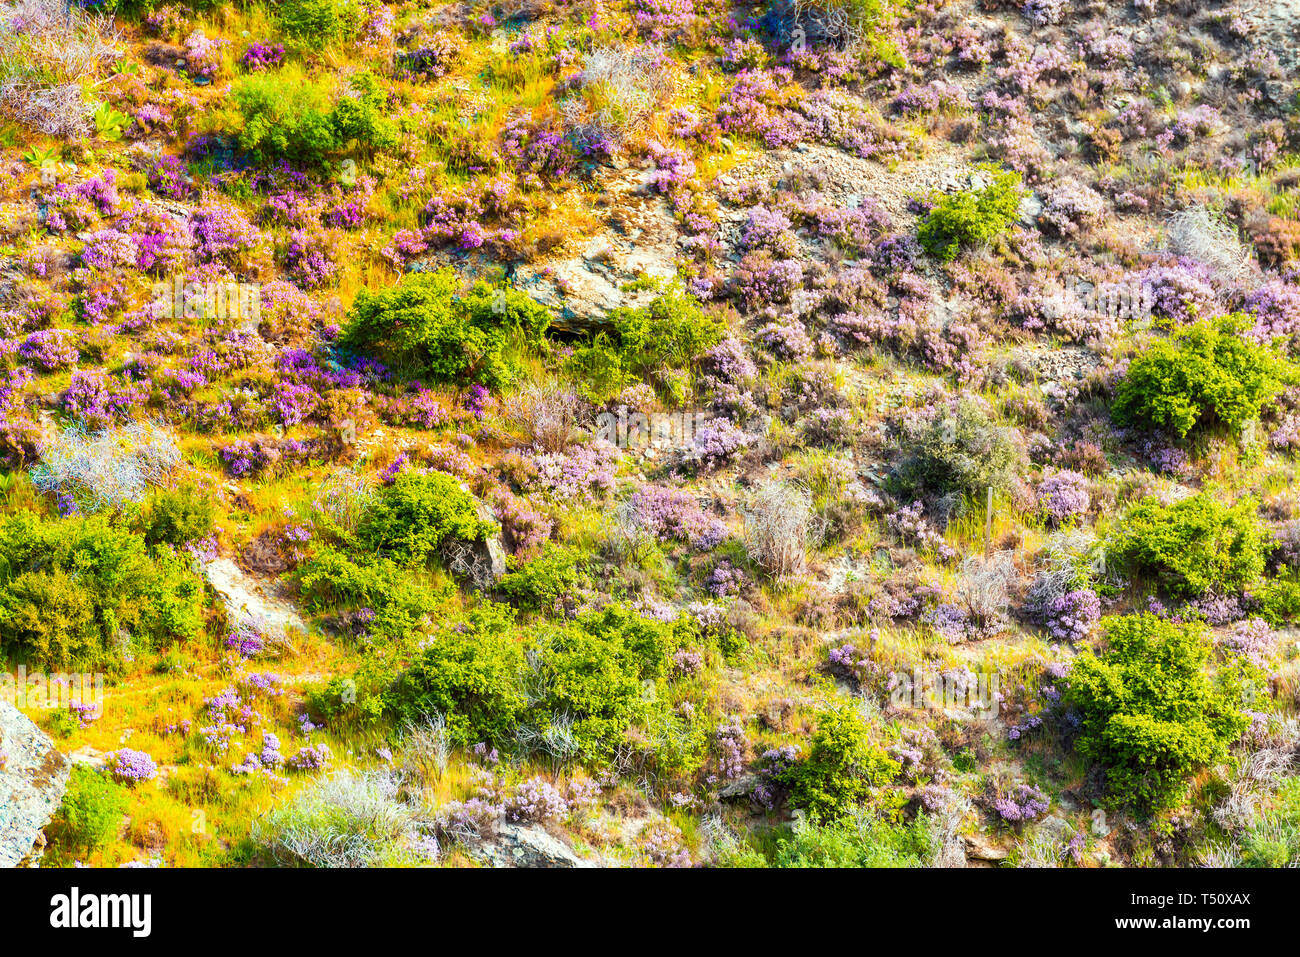 View of the plants on the mountainside, Southern Alps, New Zealand sortiert Stock Photo